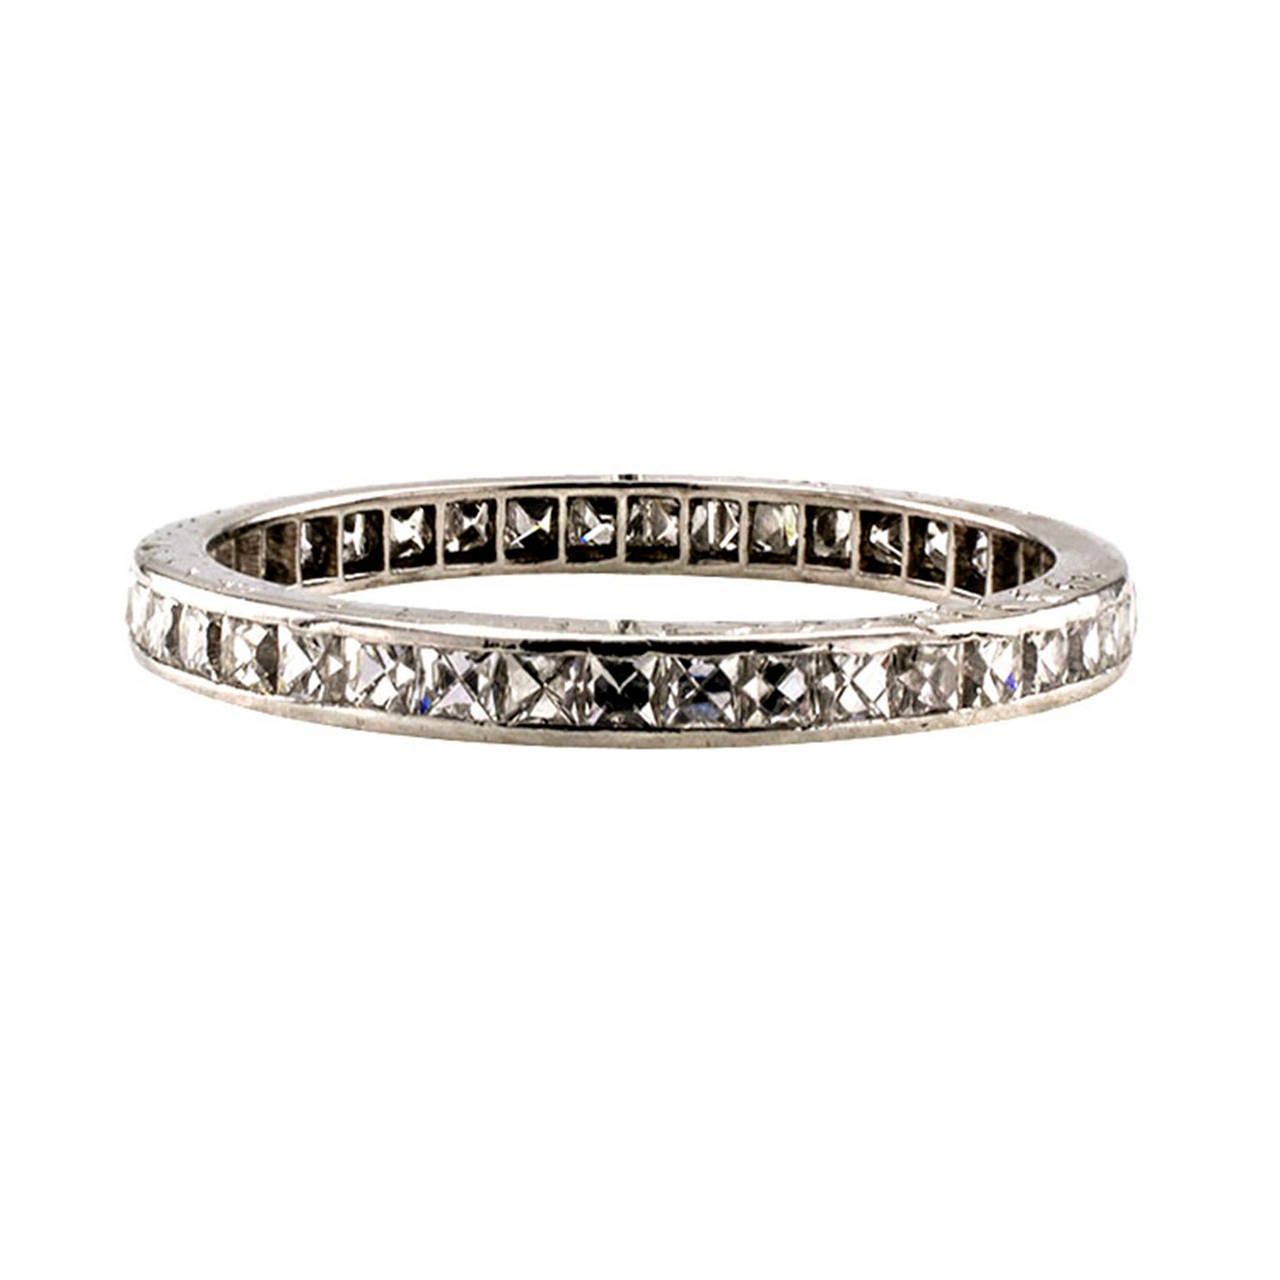 Art Deco French-Cut Diamond Platinum Eternity Ring

Circa 1920.  This is a special find, continuously set with thirty-nine French-cut diamonds totaling approximately 1.00 carat, approximately G color and VS clarity, mounted in platinum, 2 mm wide,